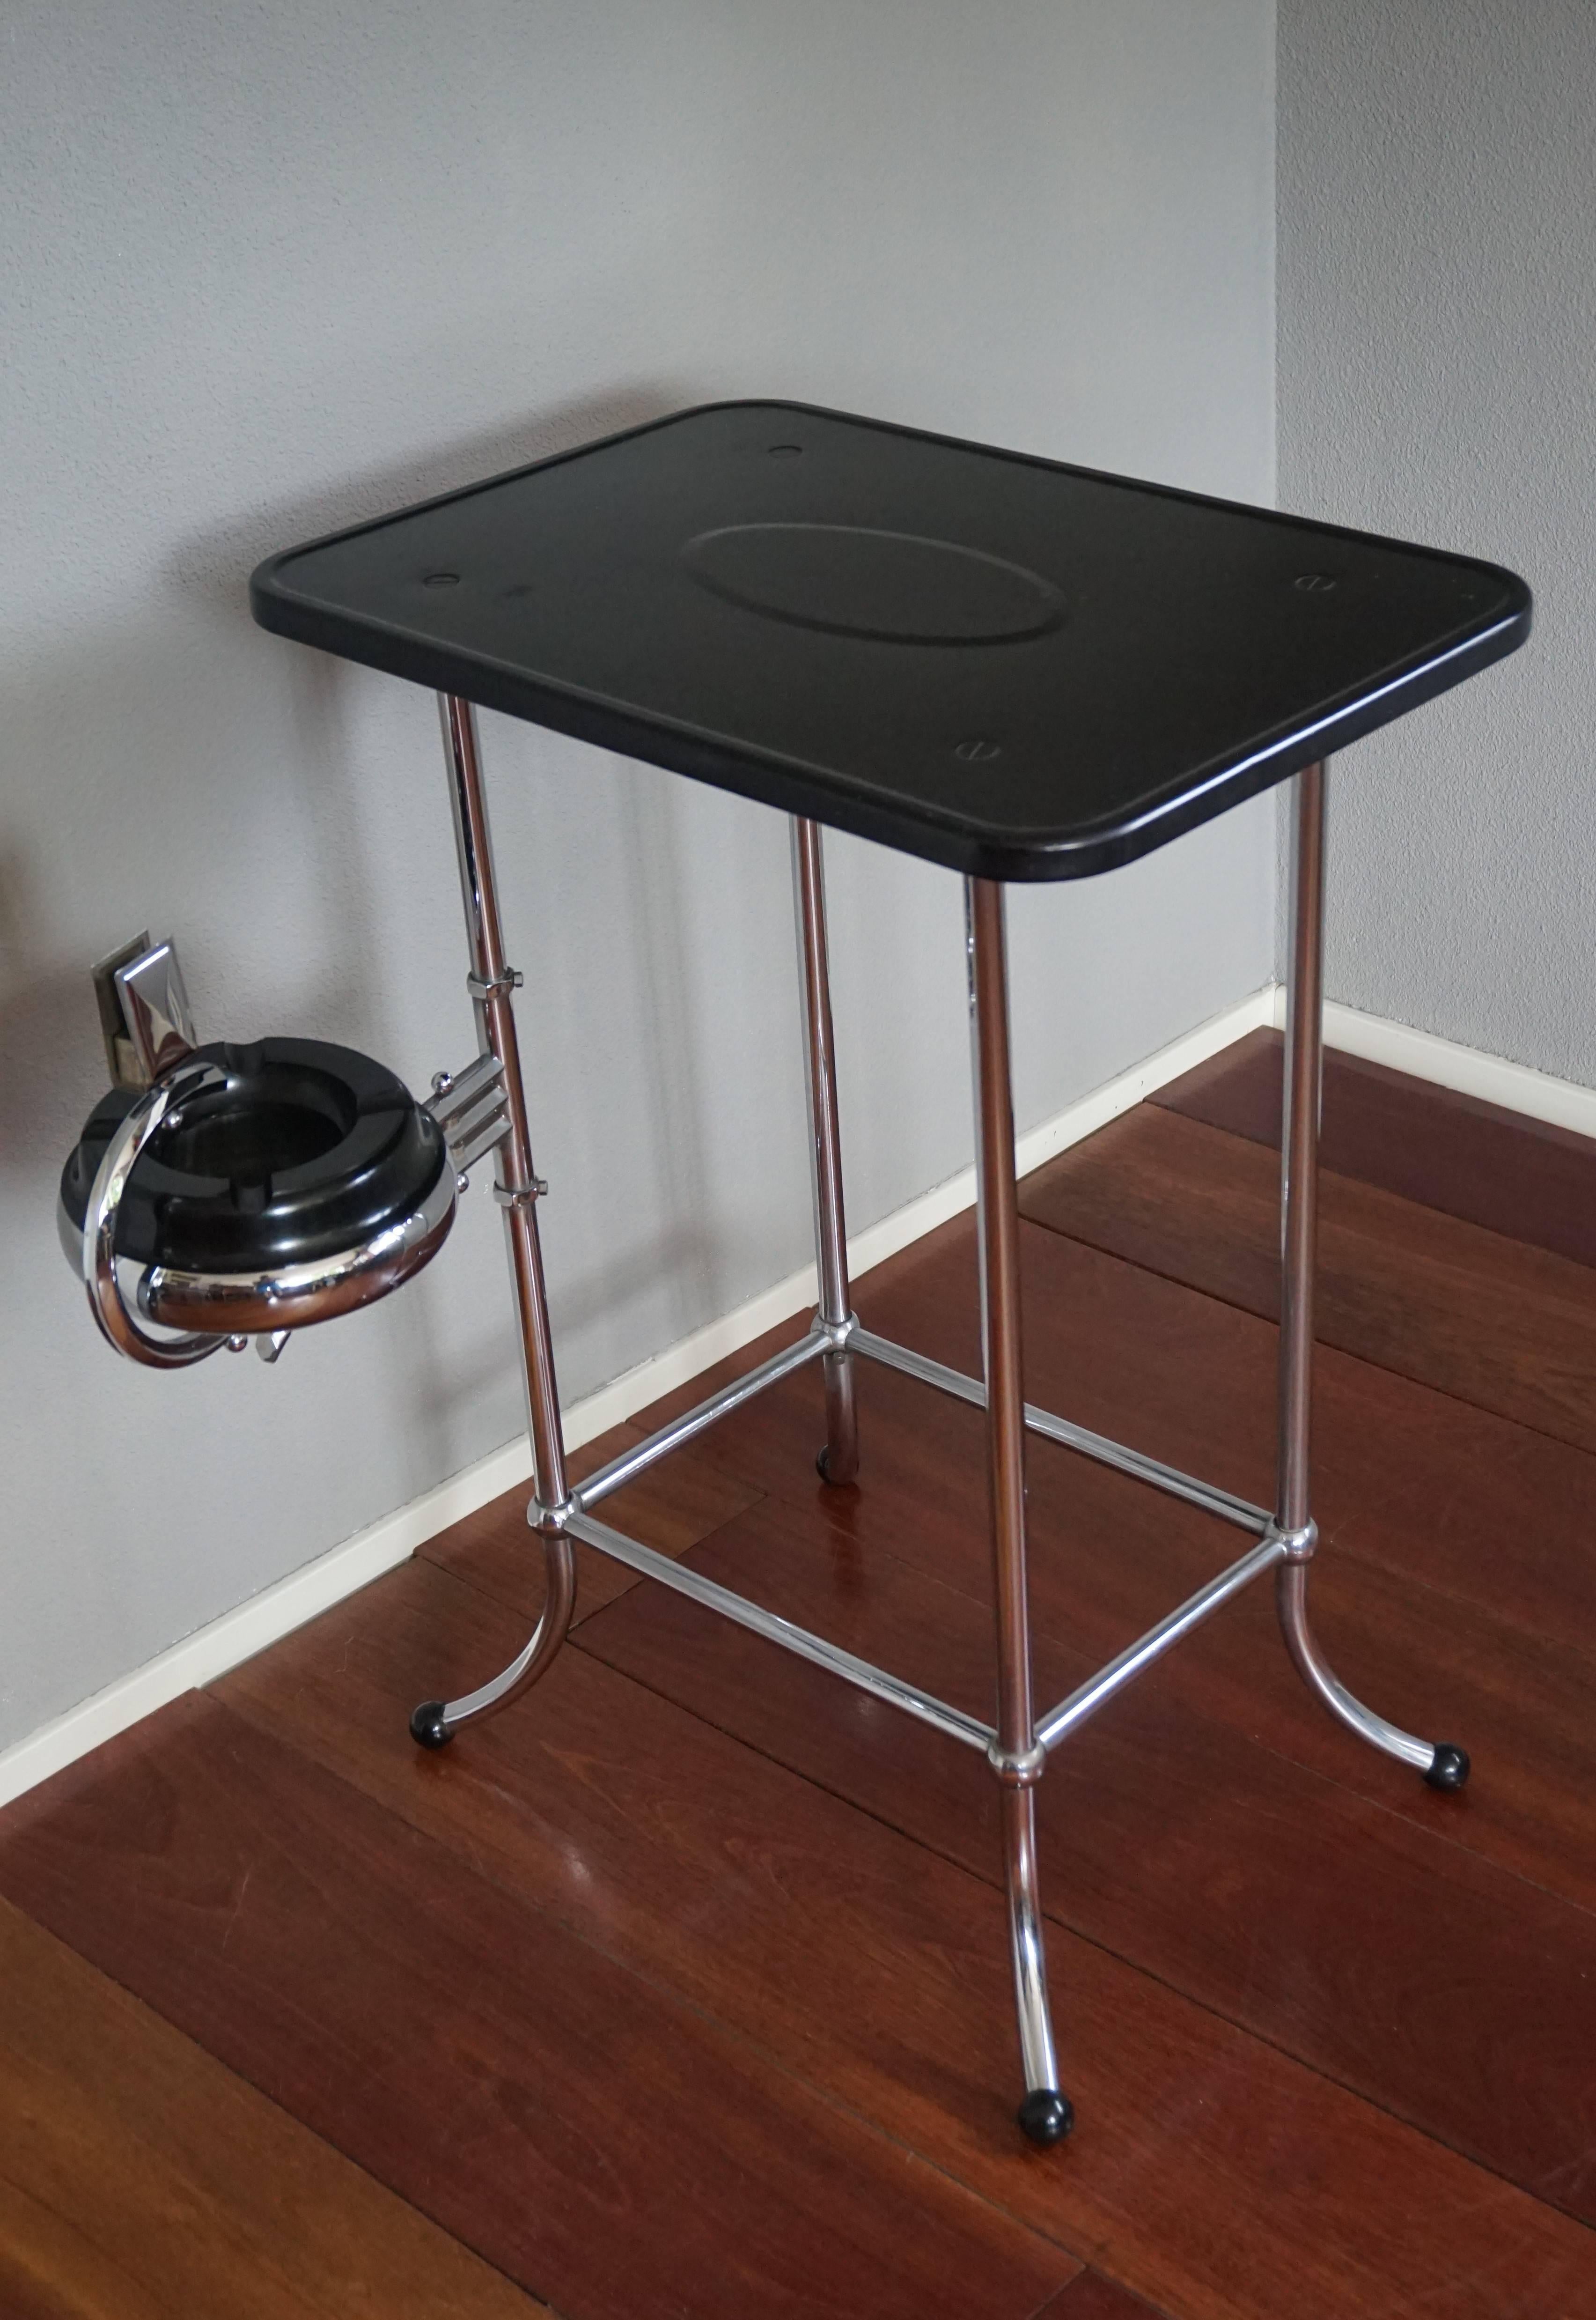 Rare, timeless and original Machine Age drinks table.

The combination of the sleek design and the wonderful materials makes this rare table highly desirable. The black painted metal top (original) shows some signs of usage, but other than that the